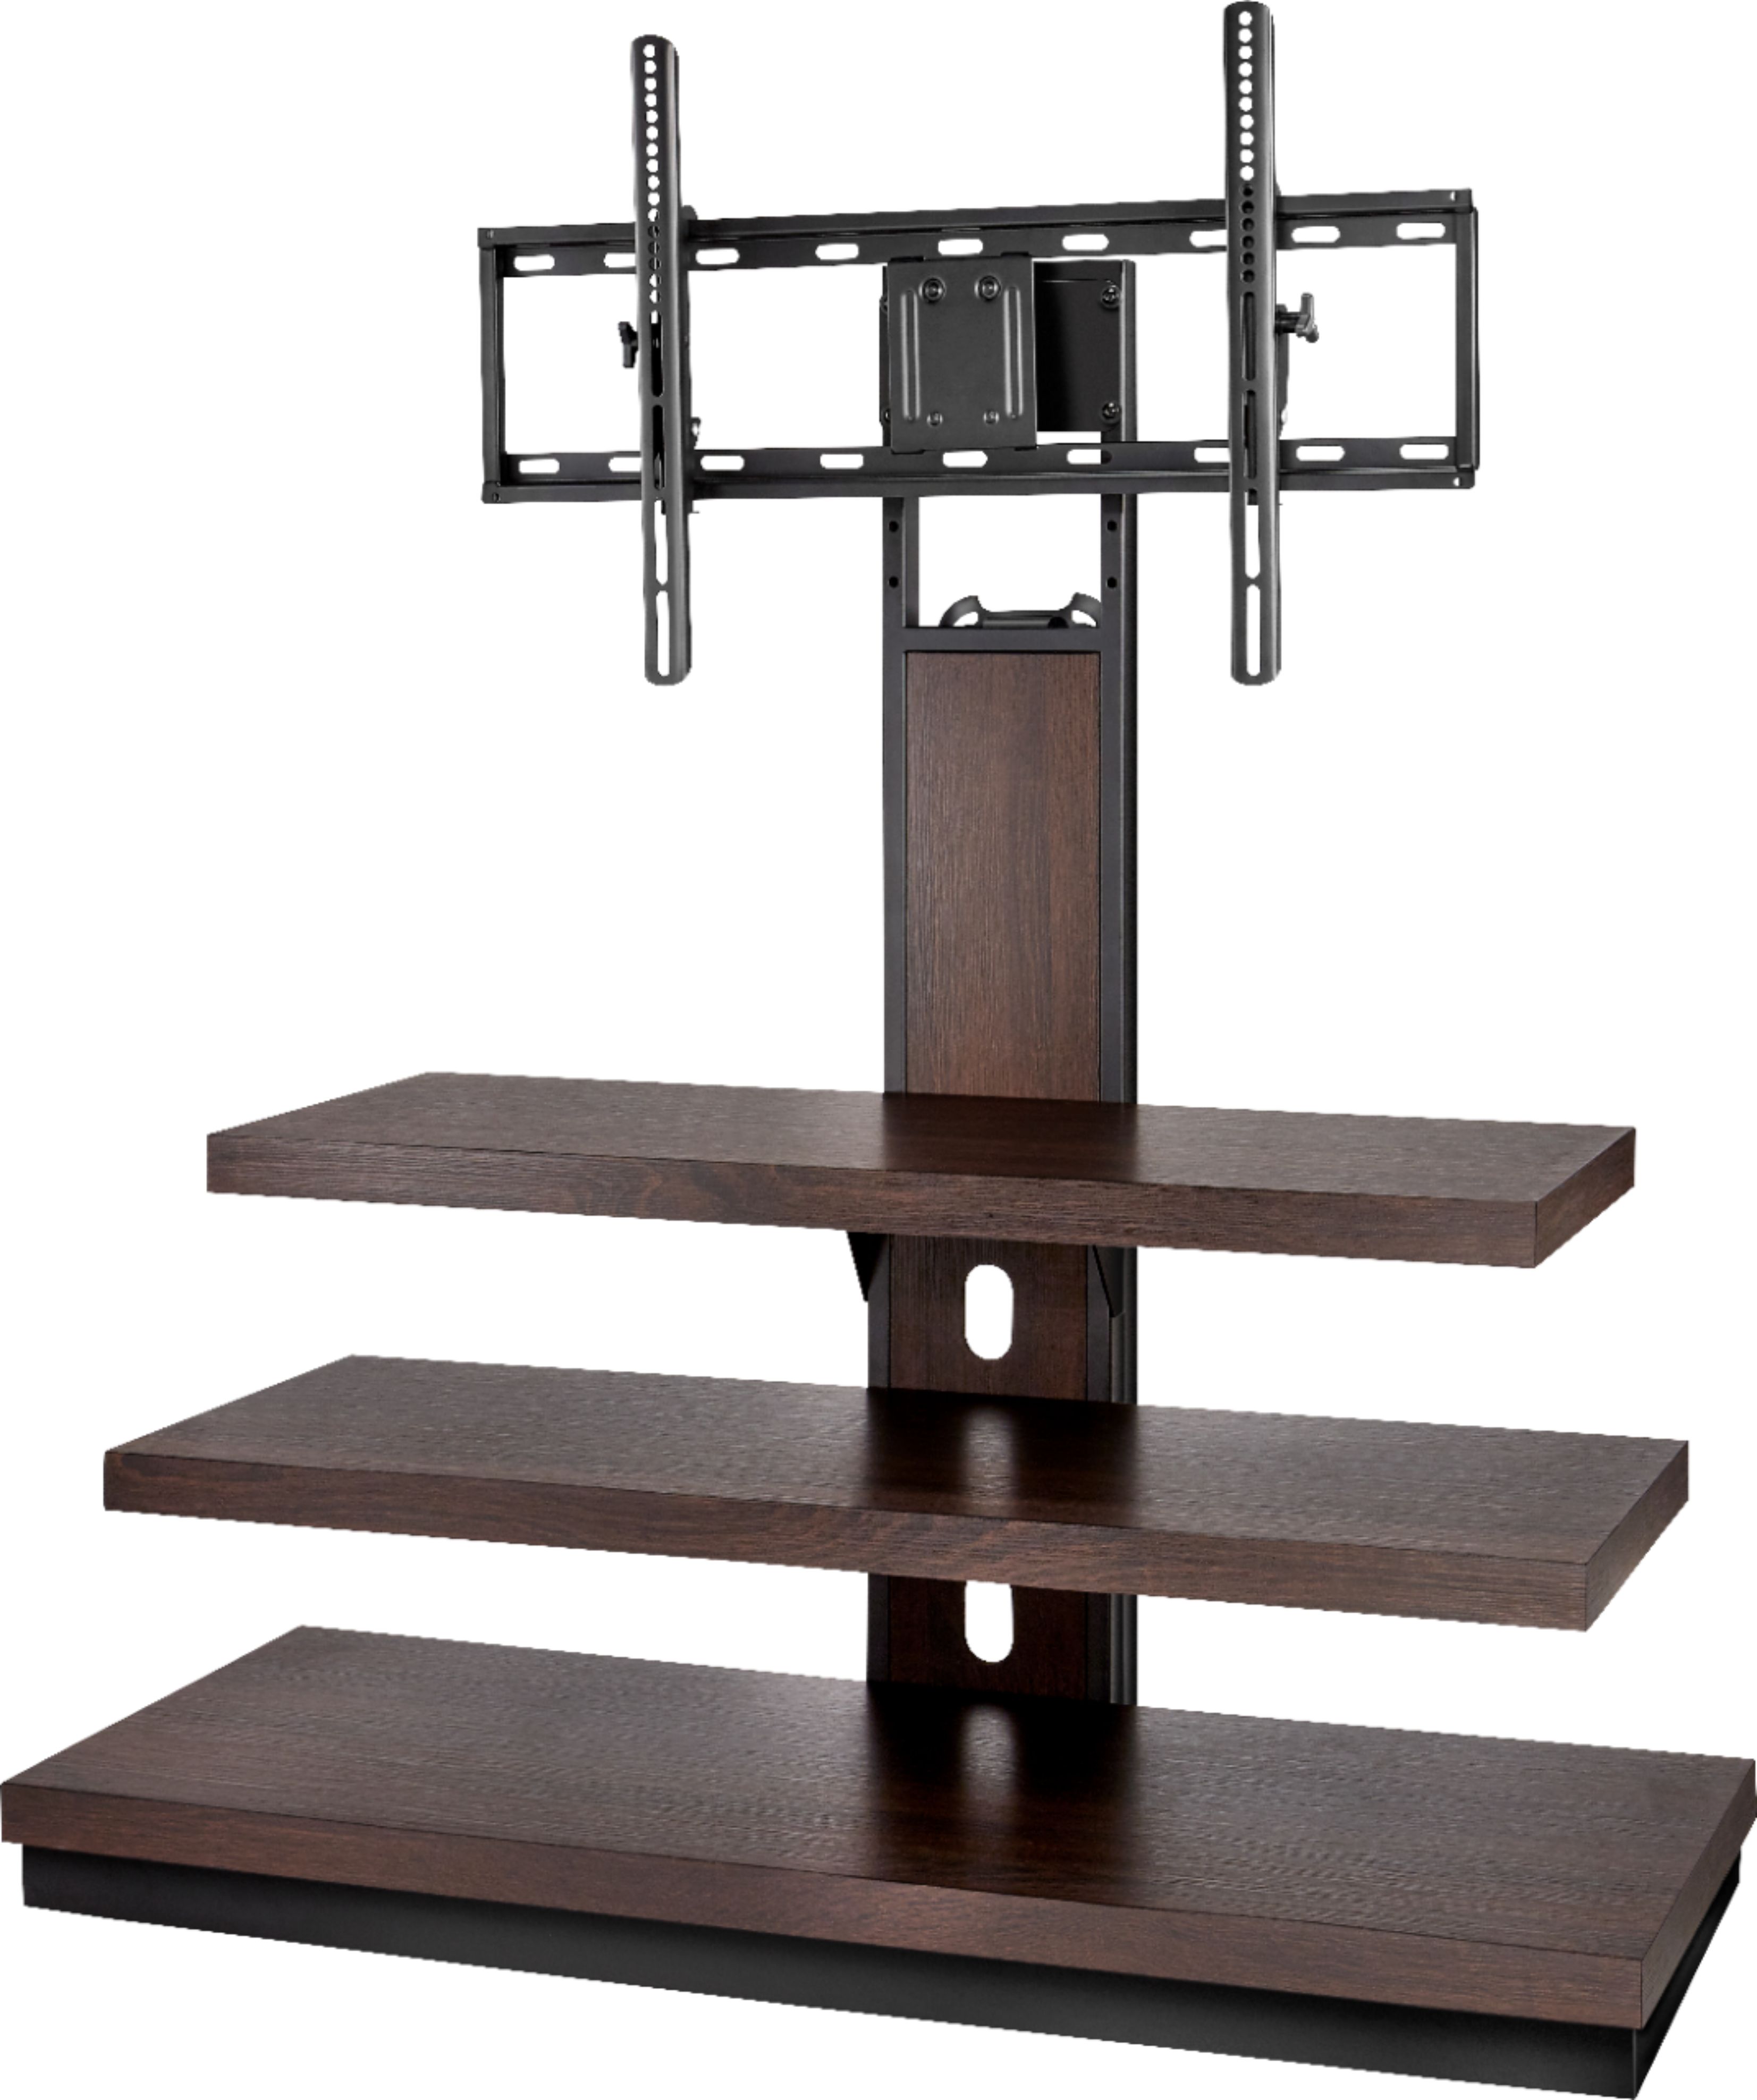 Left View: Walker Edison - Farmhouse Simple Grooved Door TV Stand for most TVs up to 80" - Stone Grey